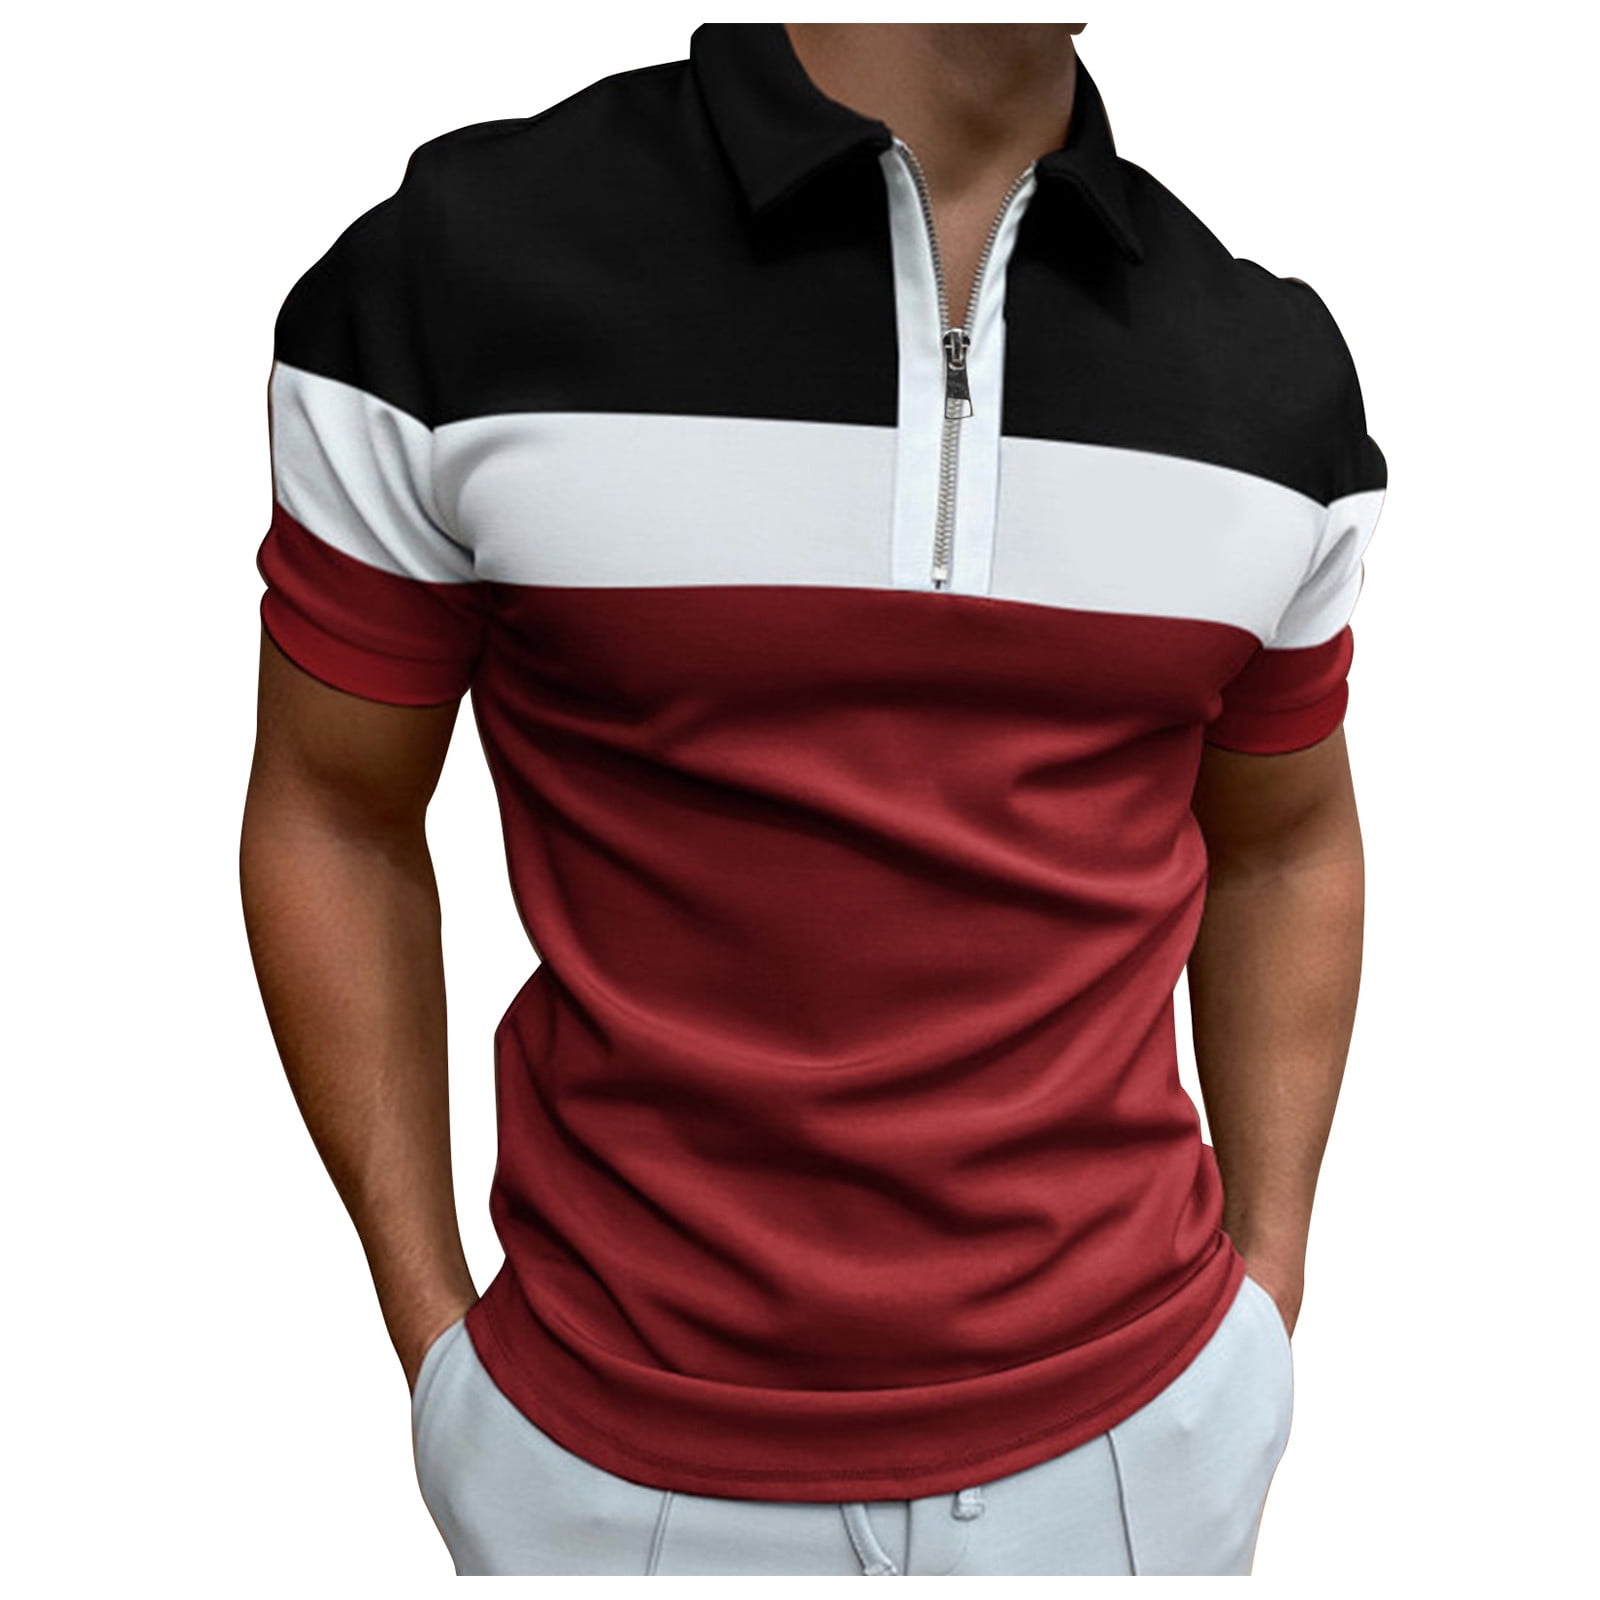 HDHDHDHDH 2022 spring and summer new men's short-sleeved polo shirt Fashion  leisure sports polo shirt - AliExpress